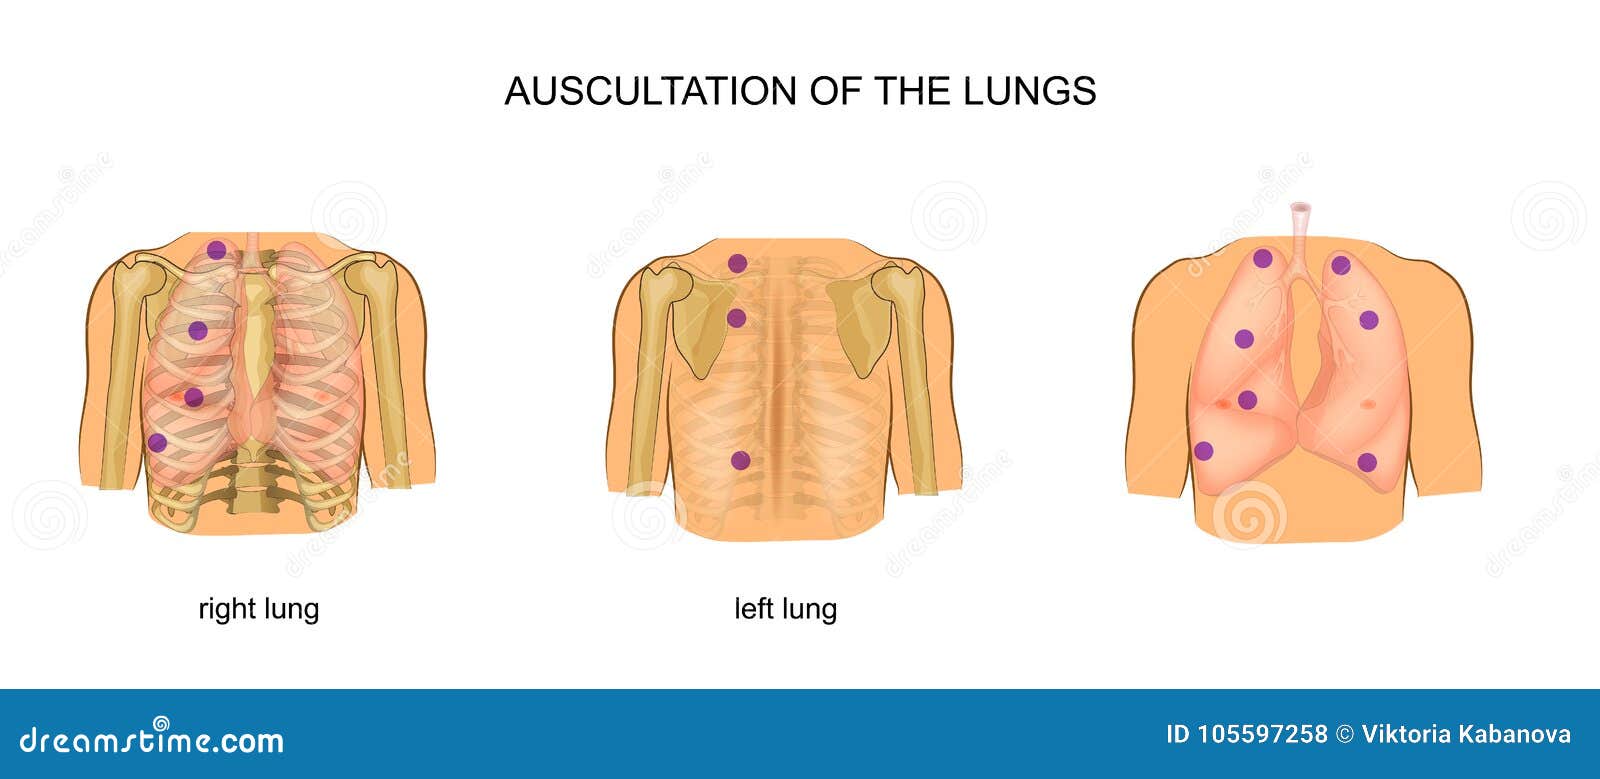 auscultation of the lungs